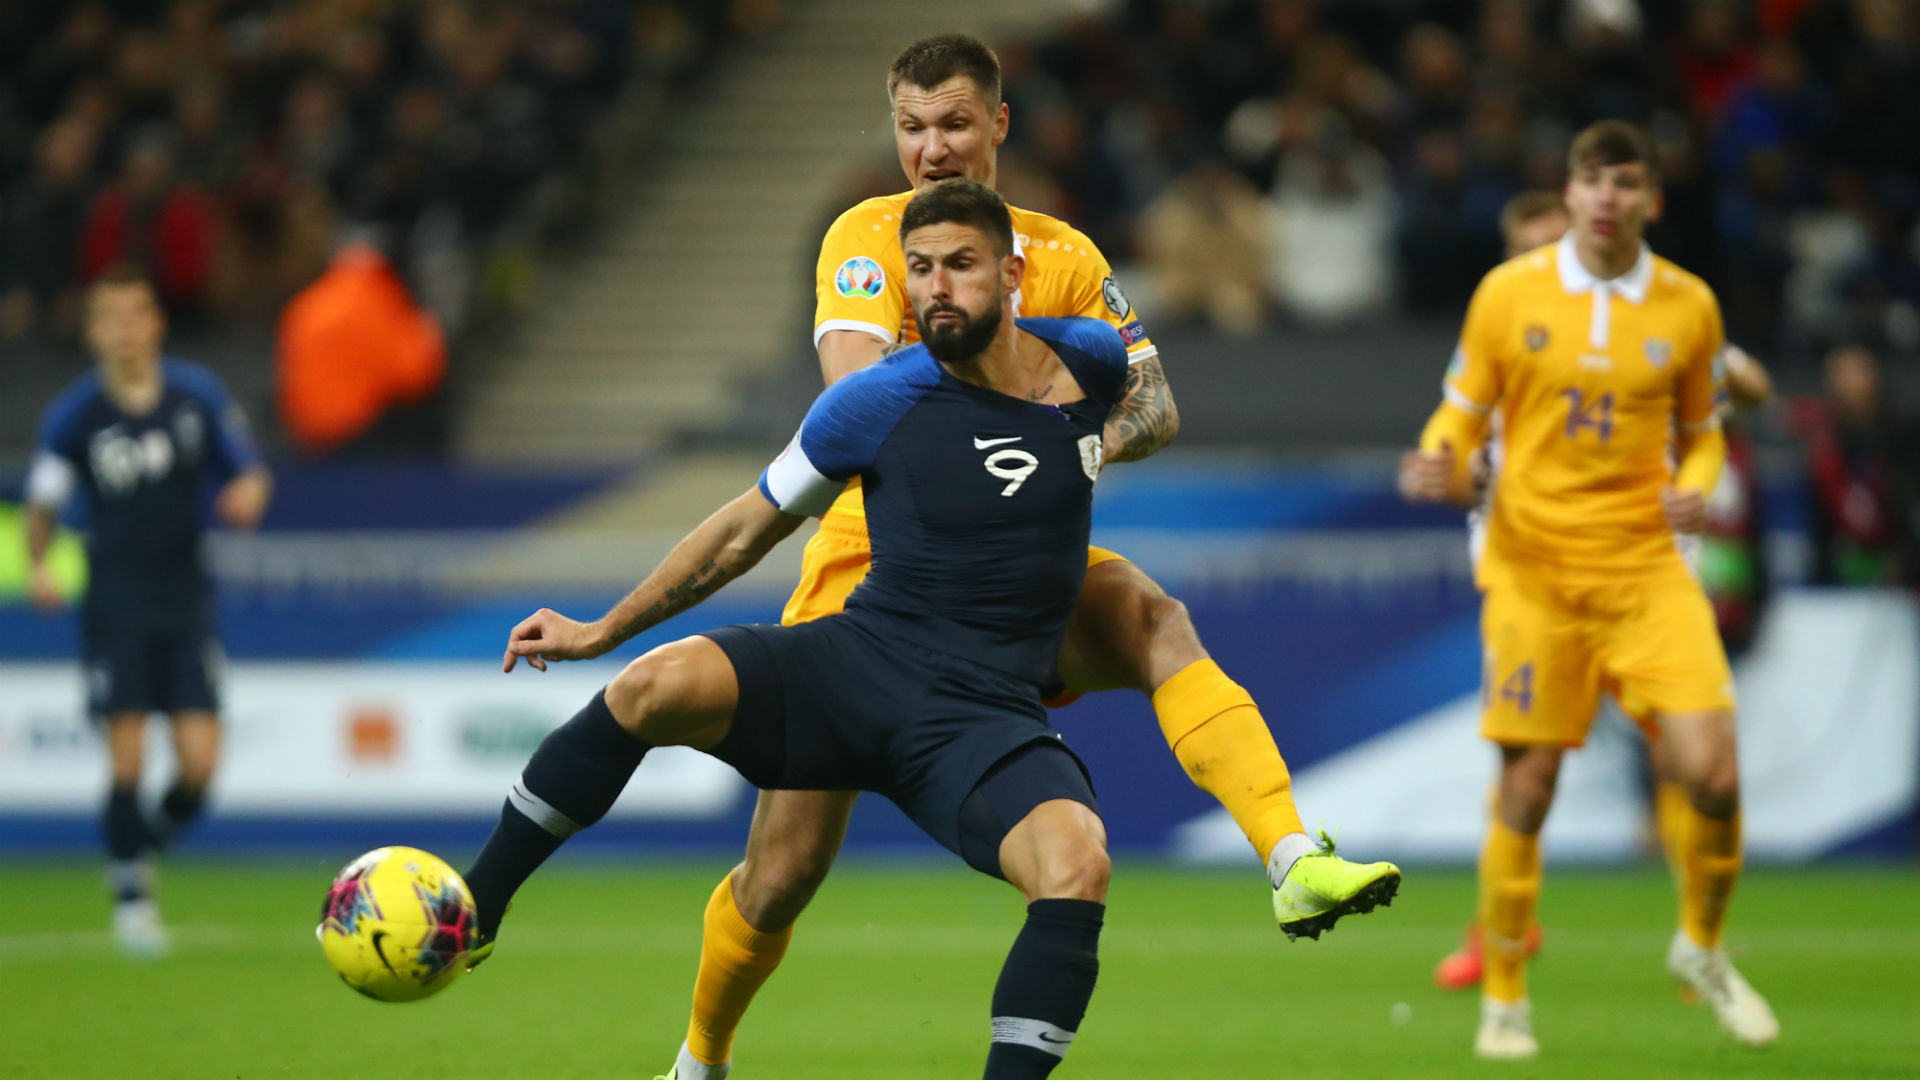 France 2-1 Moldova: Giroud penalty marks Euro 2020 qualification in style